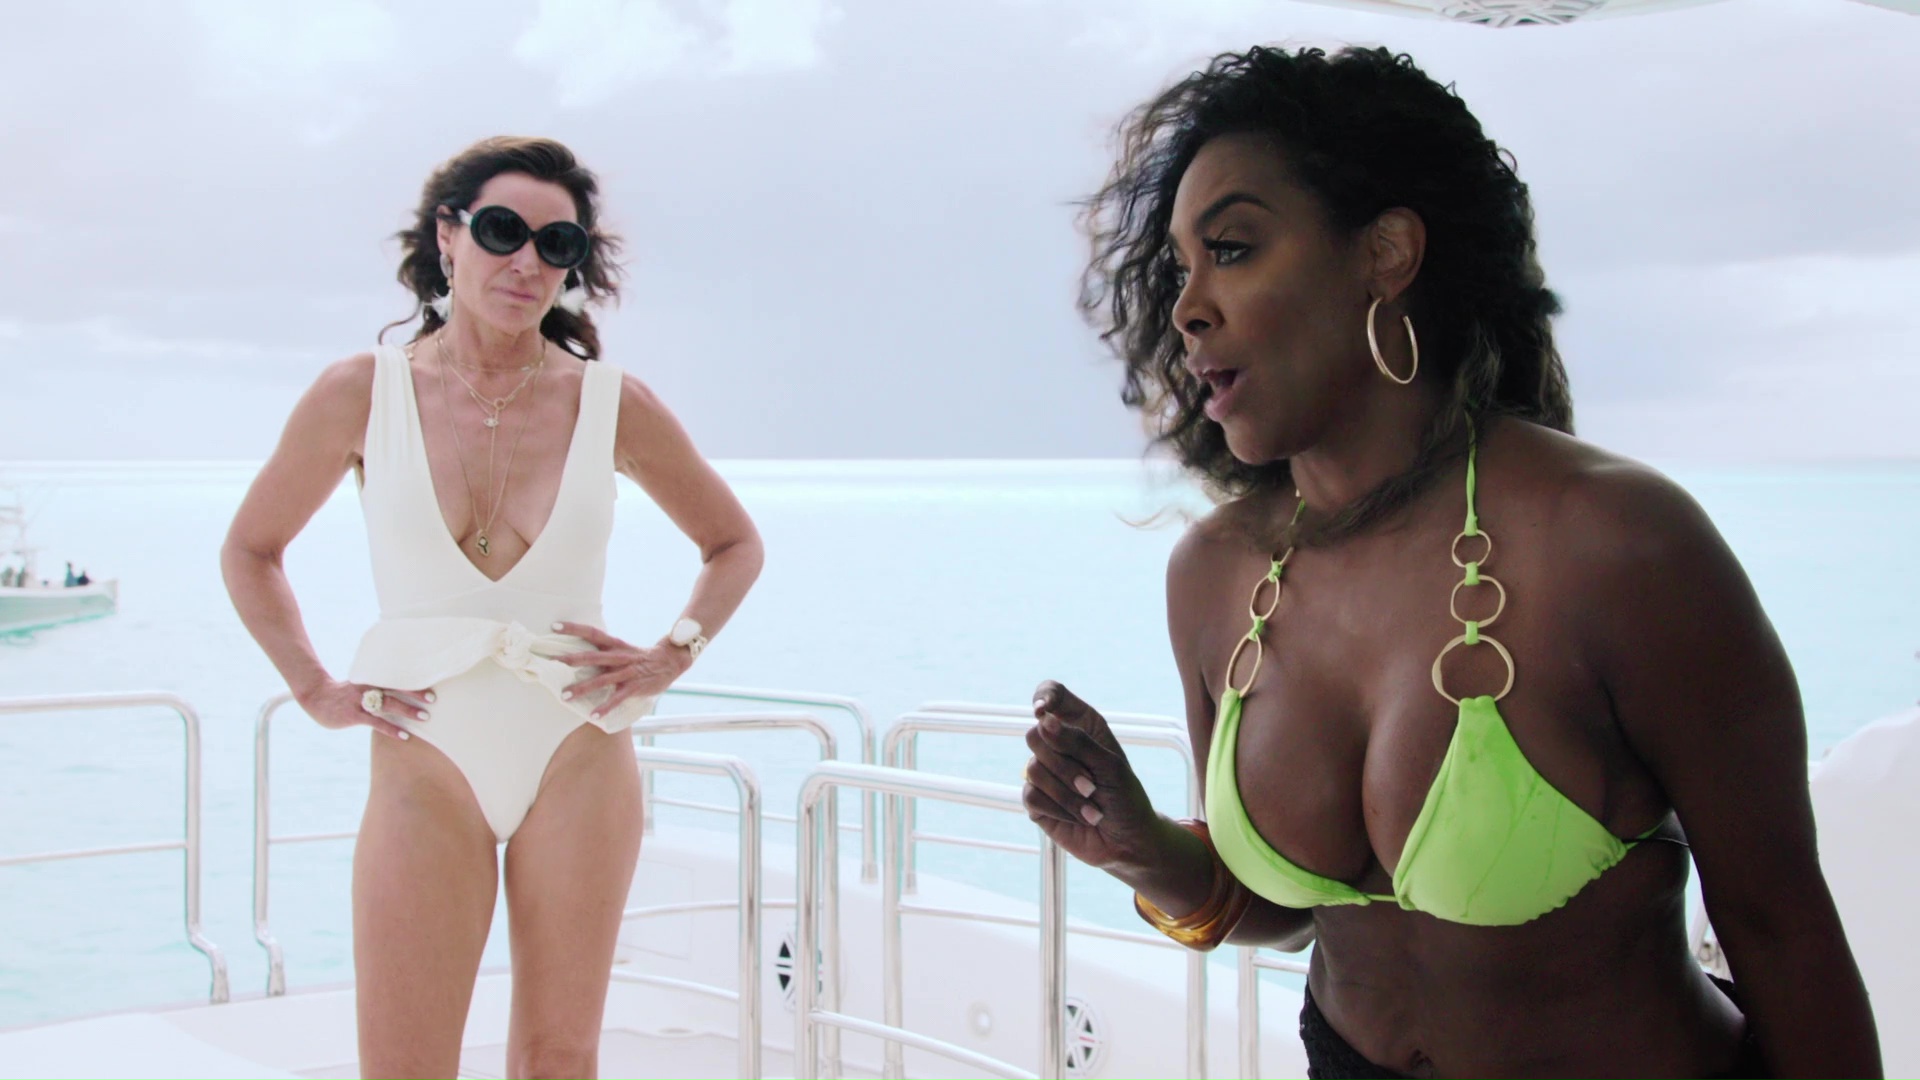 The Real Housewives Ultimate Girls Trip S1E5 saison 1 épisode 5 Stormy Waters